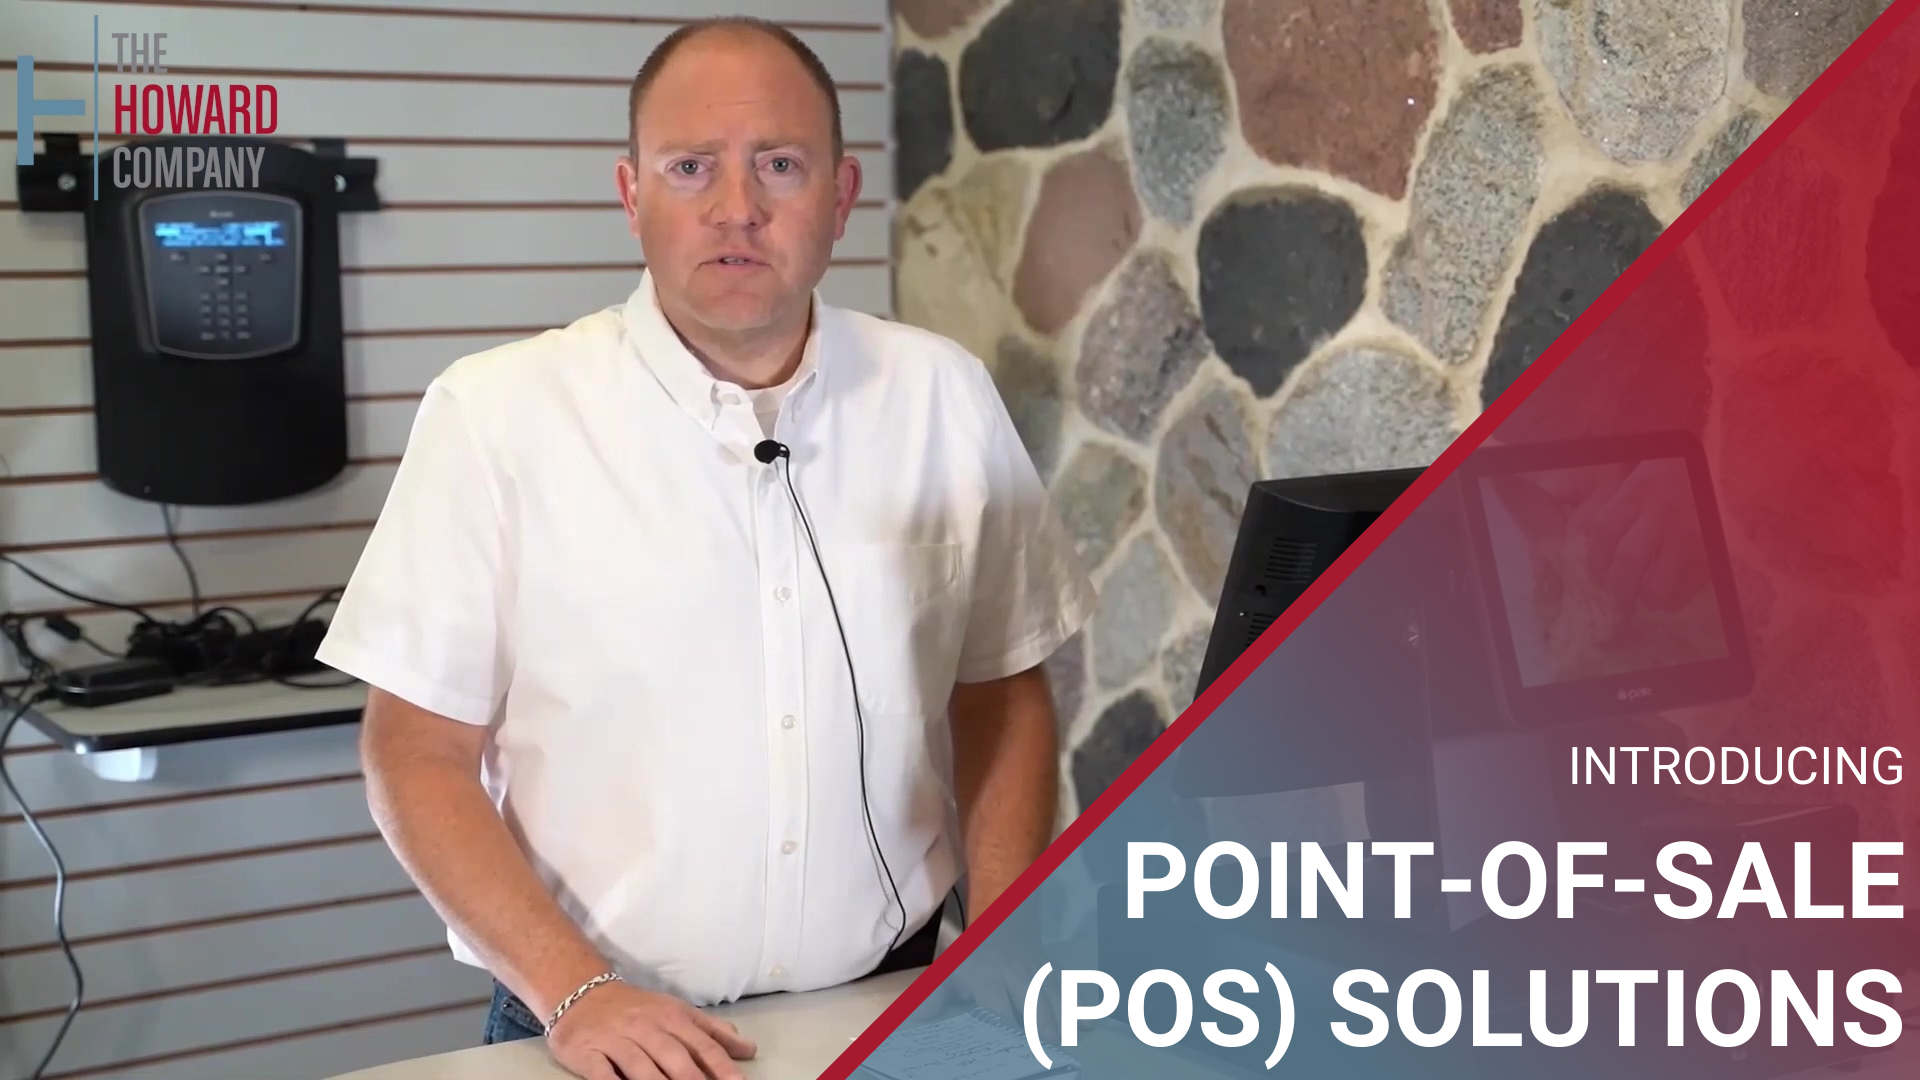 Introducing Point-Of-Sale (POS) Solutions